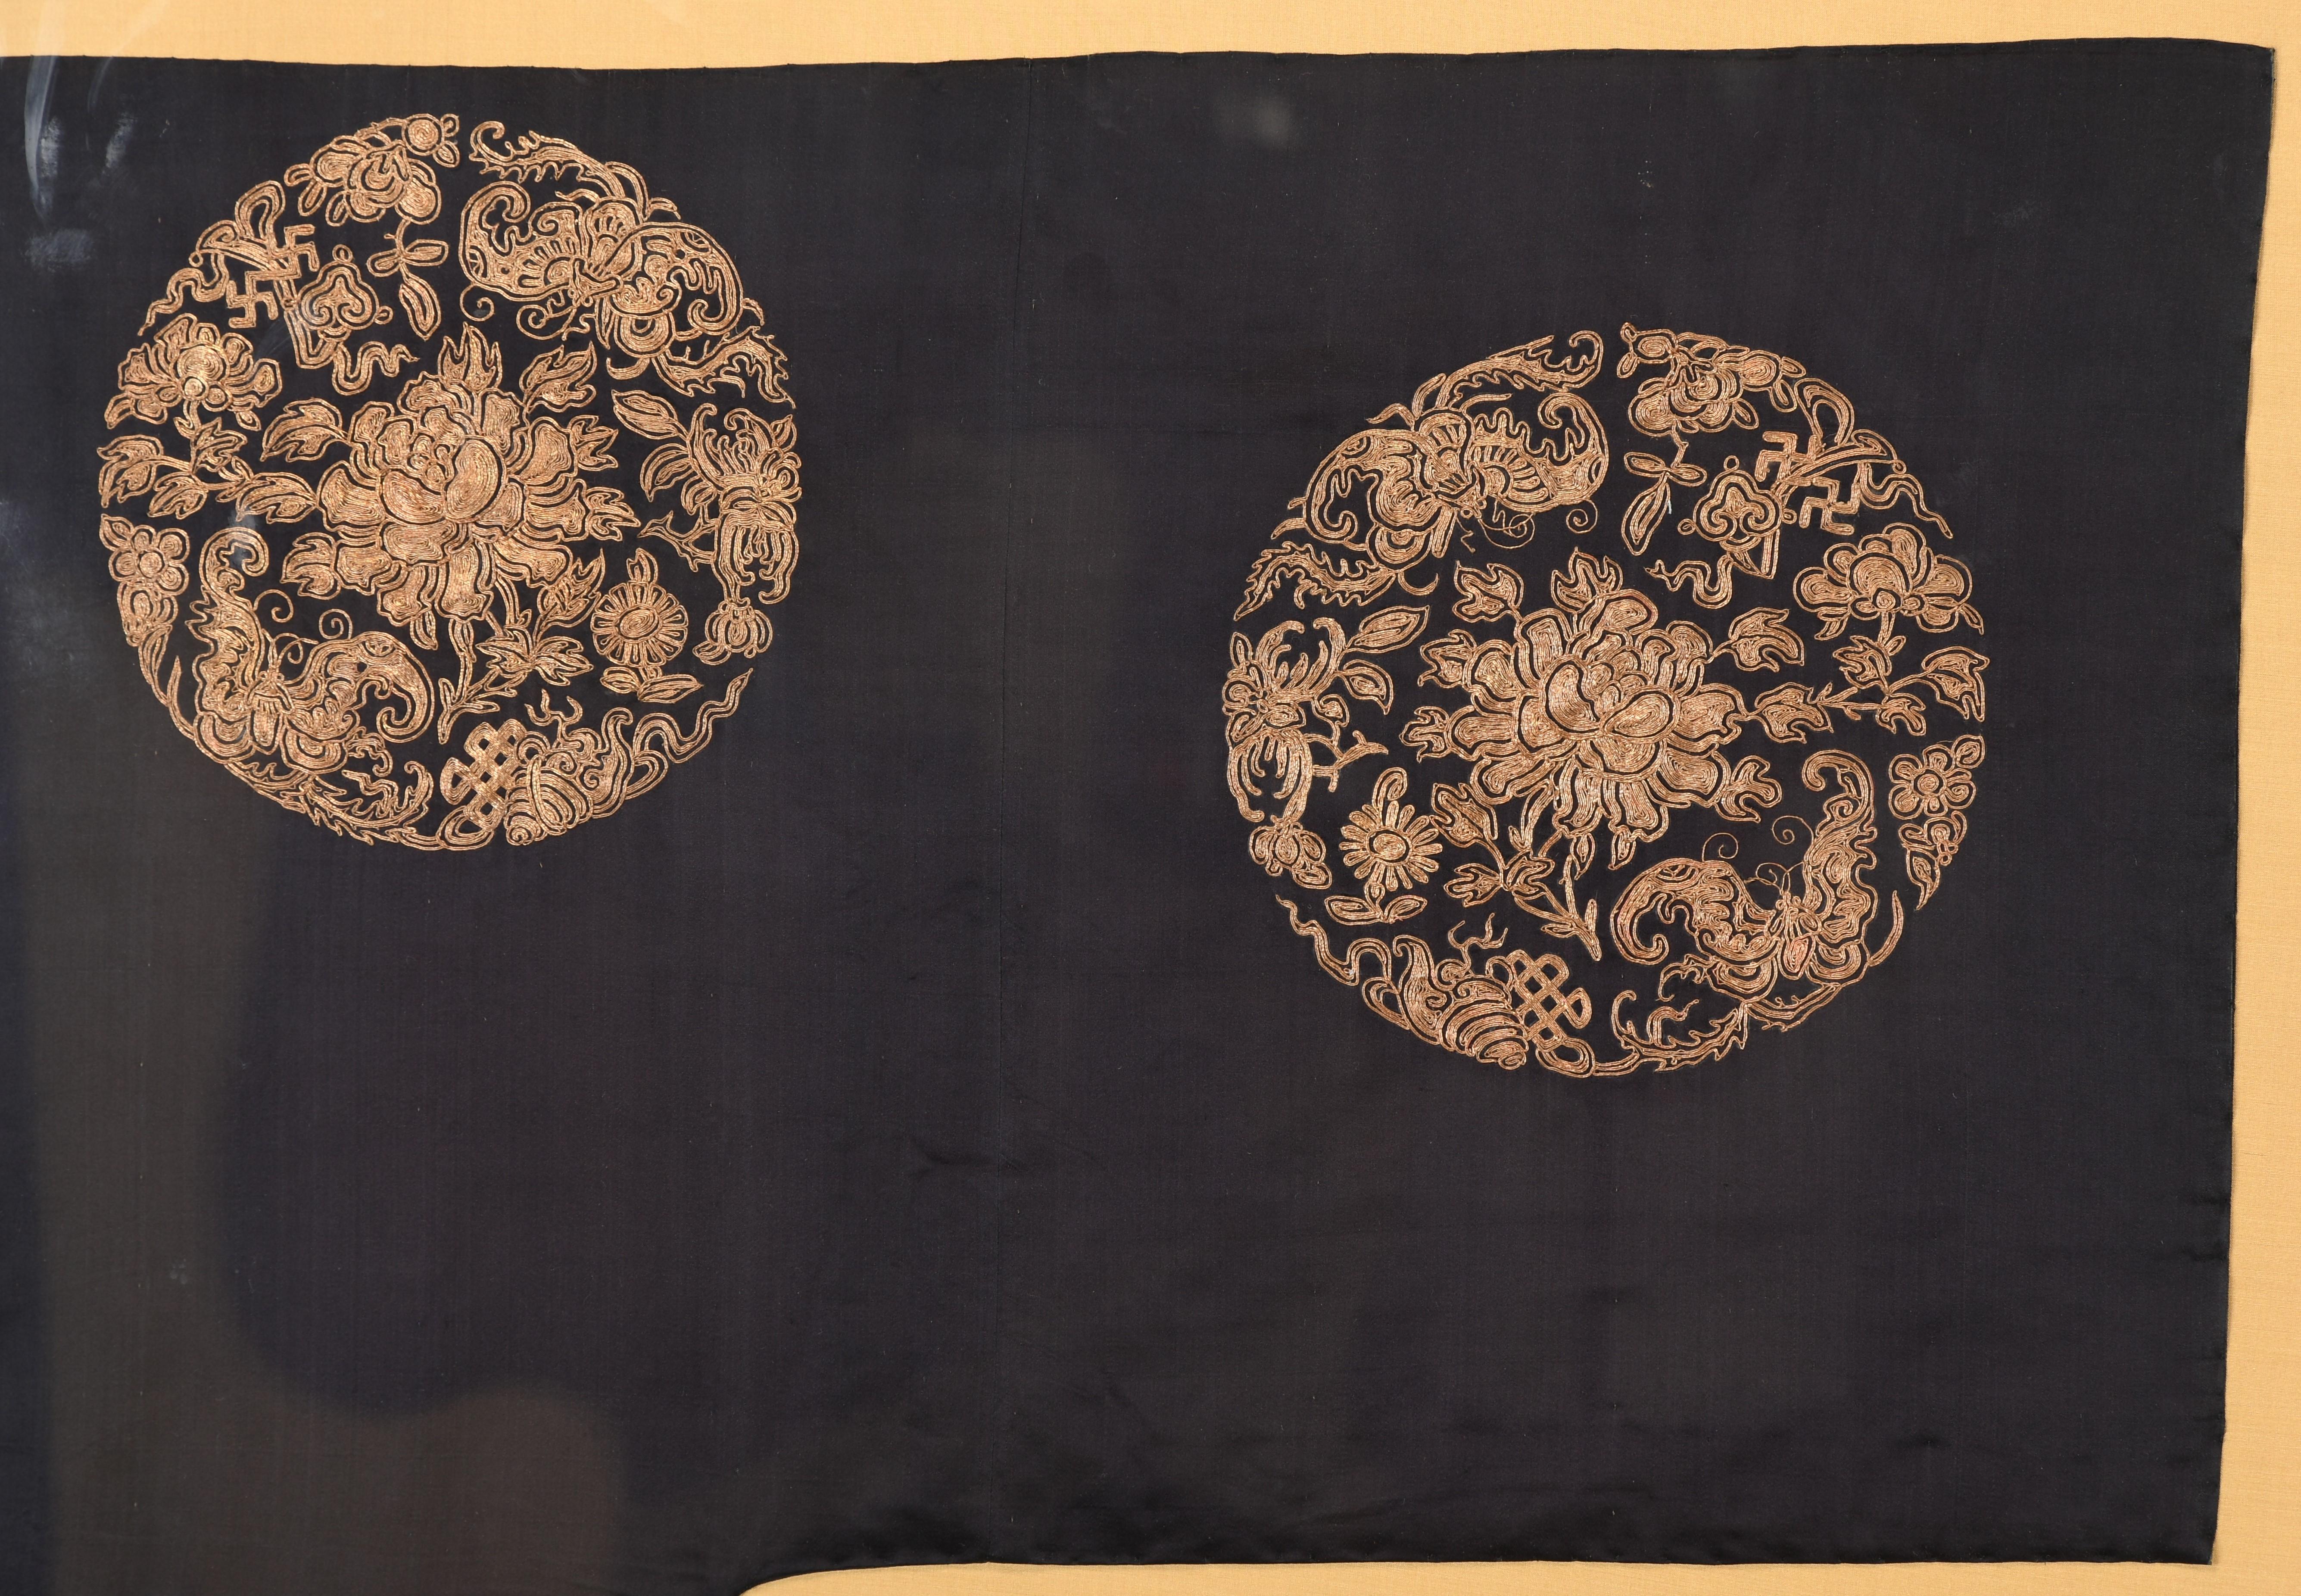 Satin Framed Chinese Kimono Daoguang Period, 1830-1850